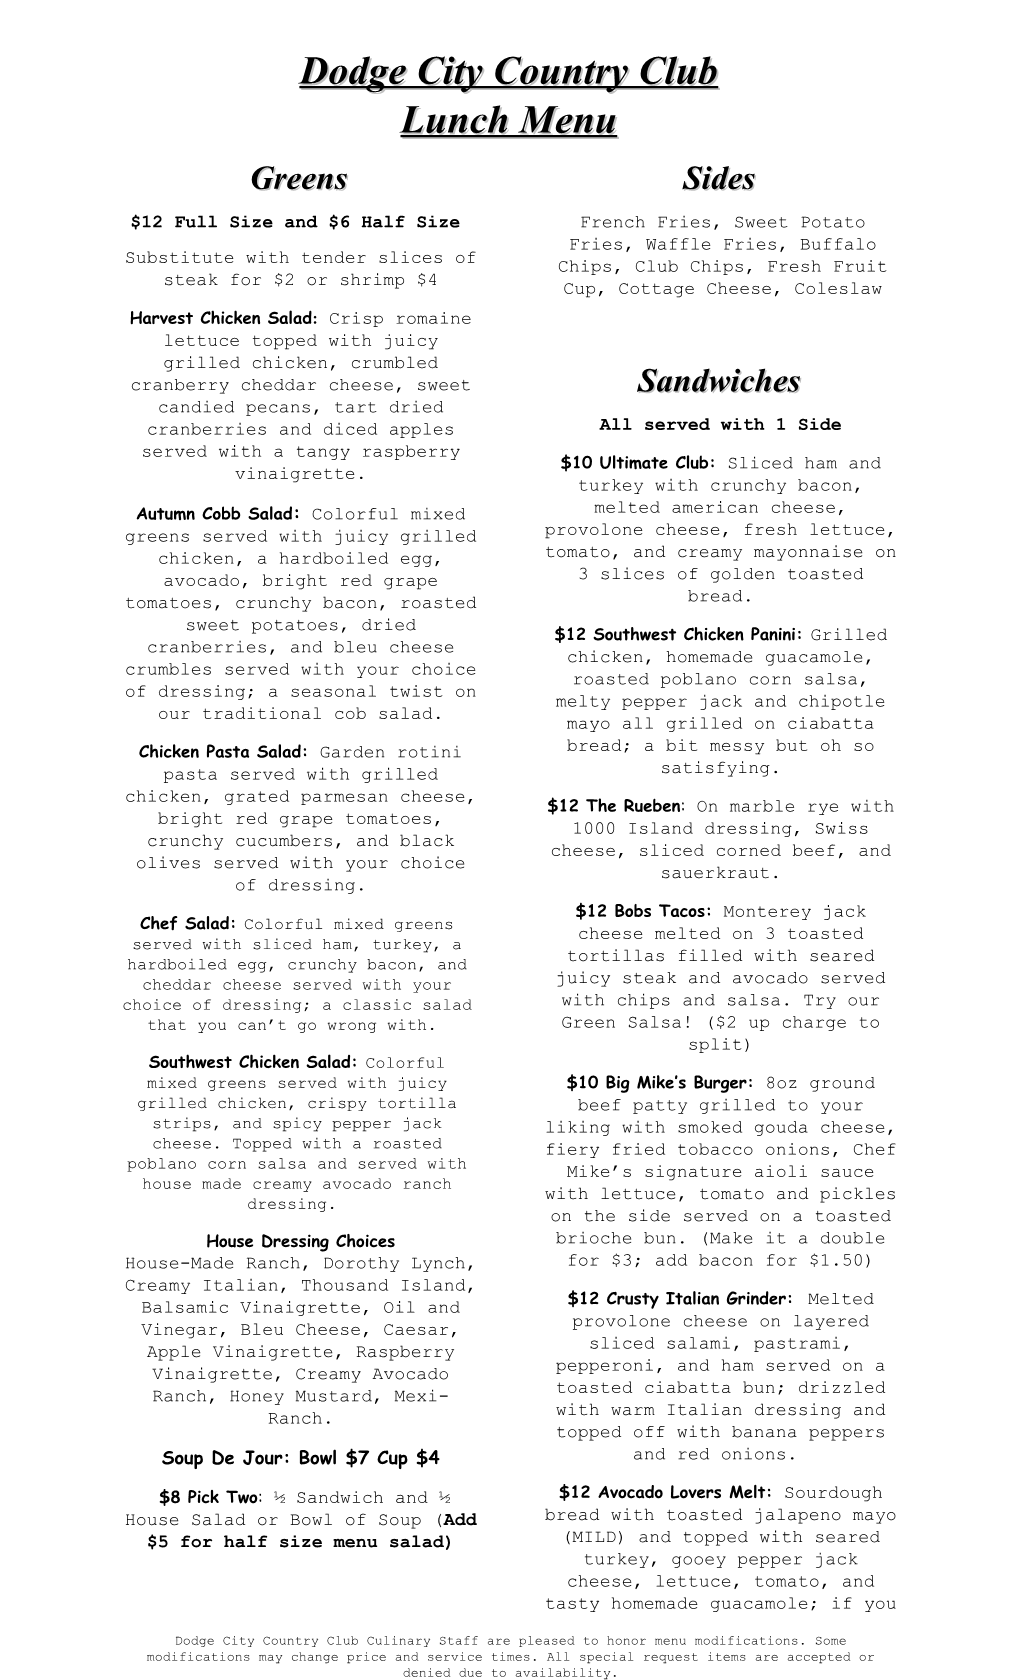 Dodge City Country Club Lunch Menu